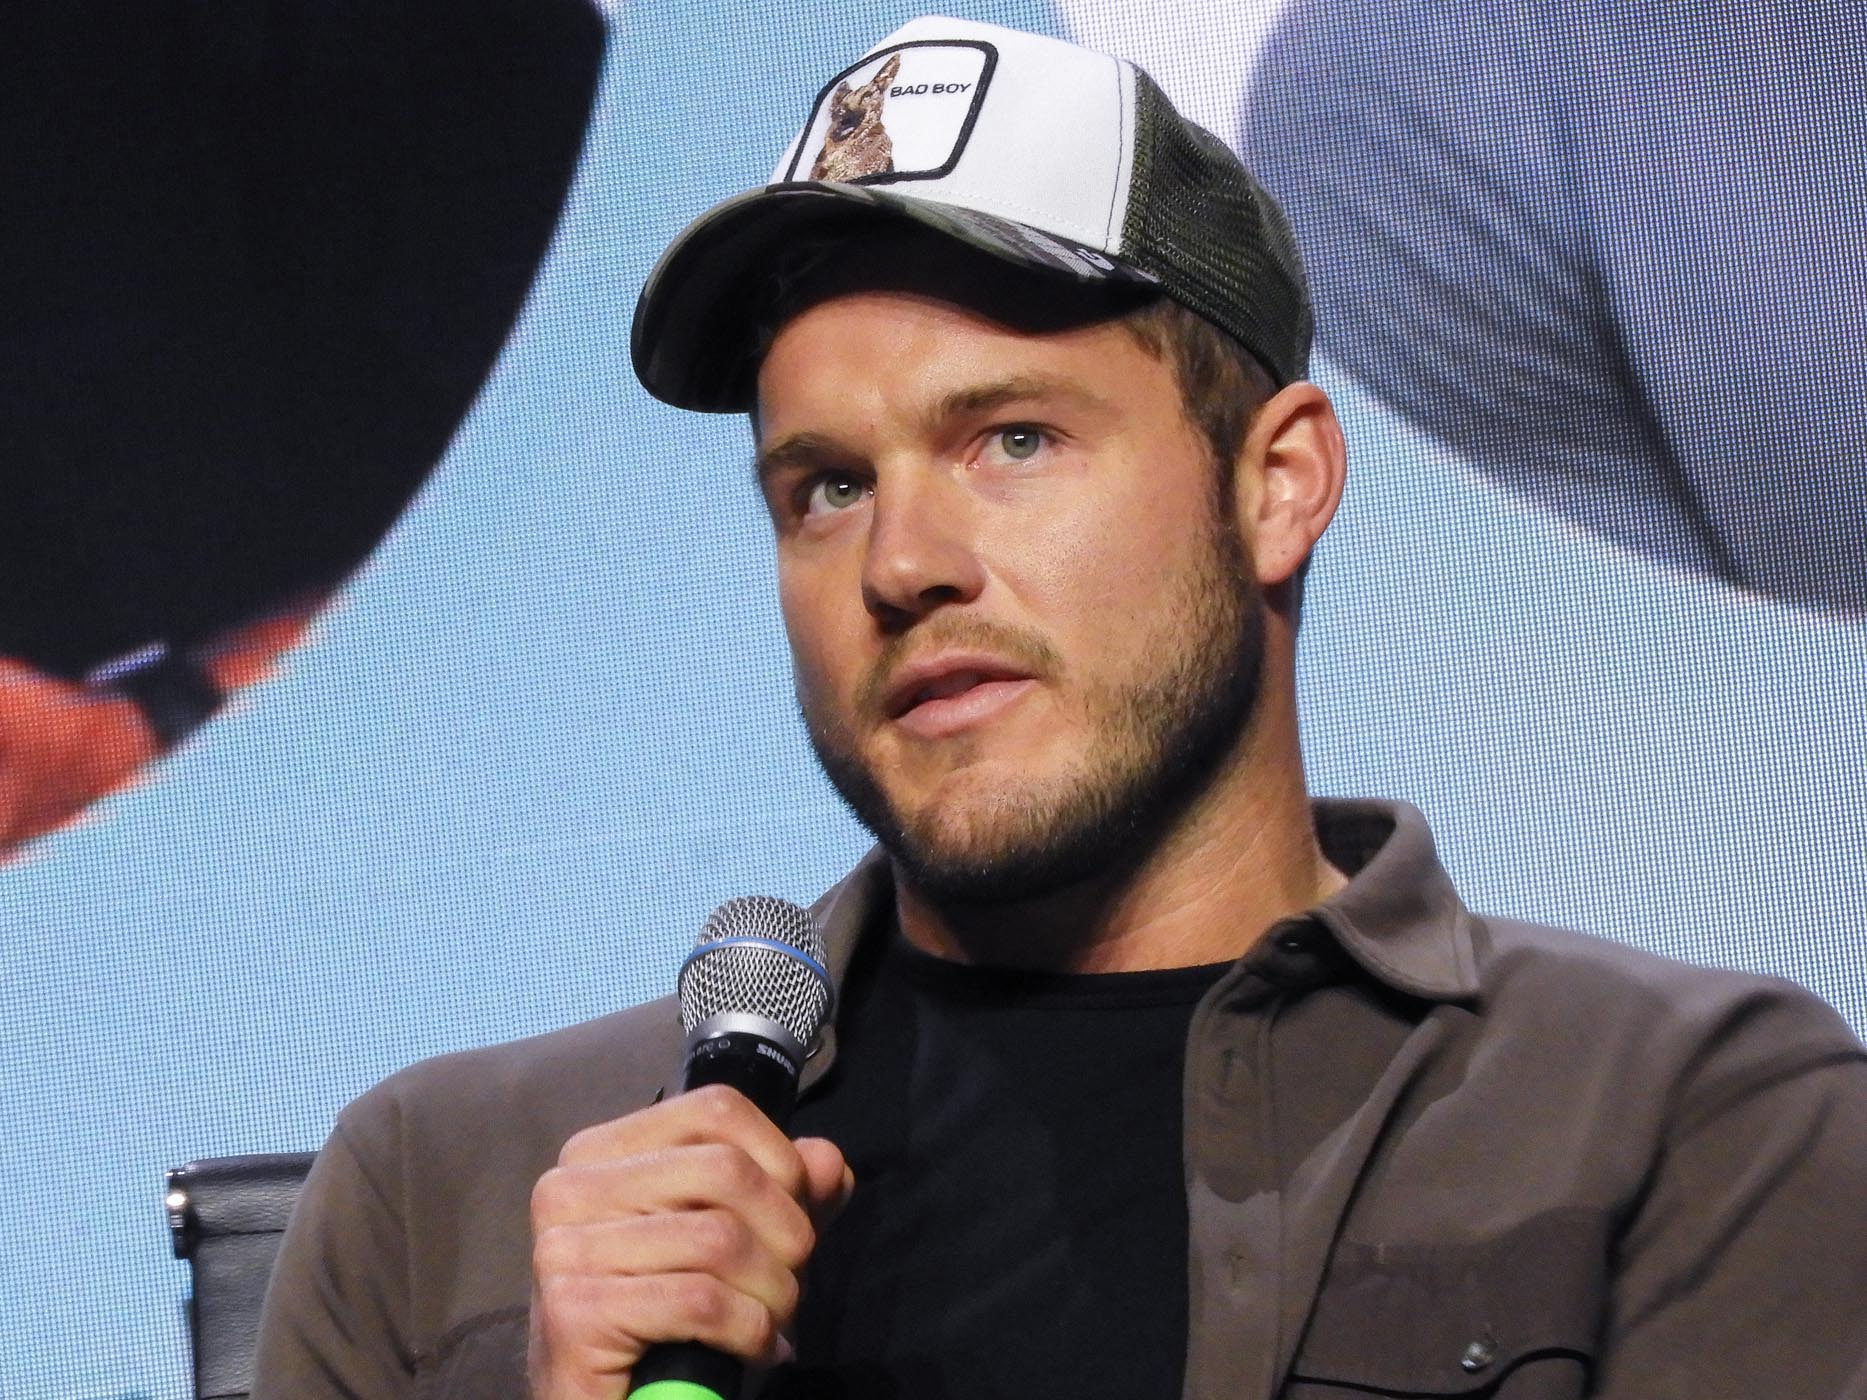 Colton Underwood, former star of "The Bachelor," on stage at NFT LA.